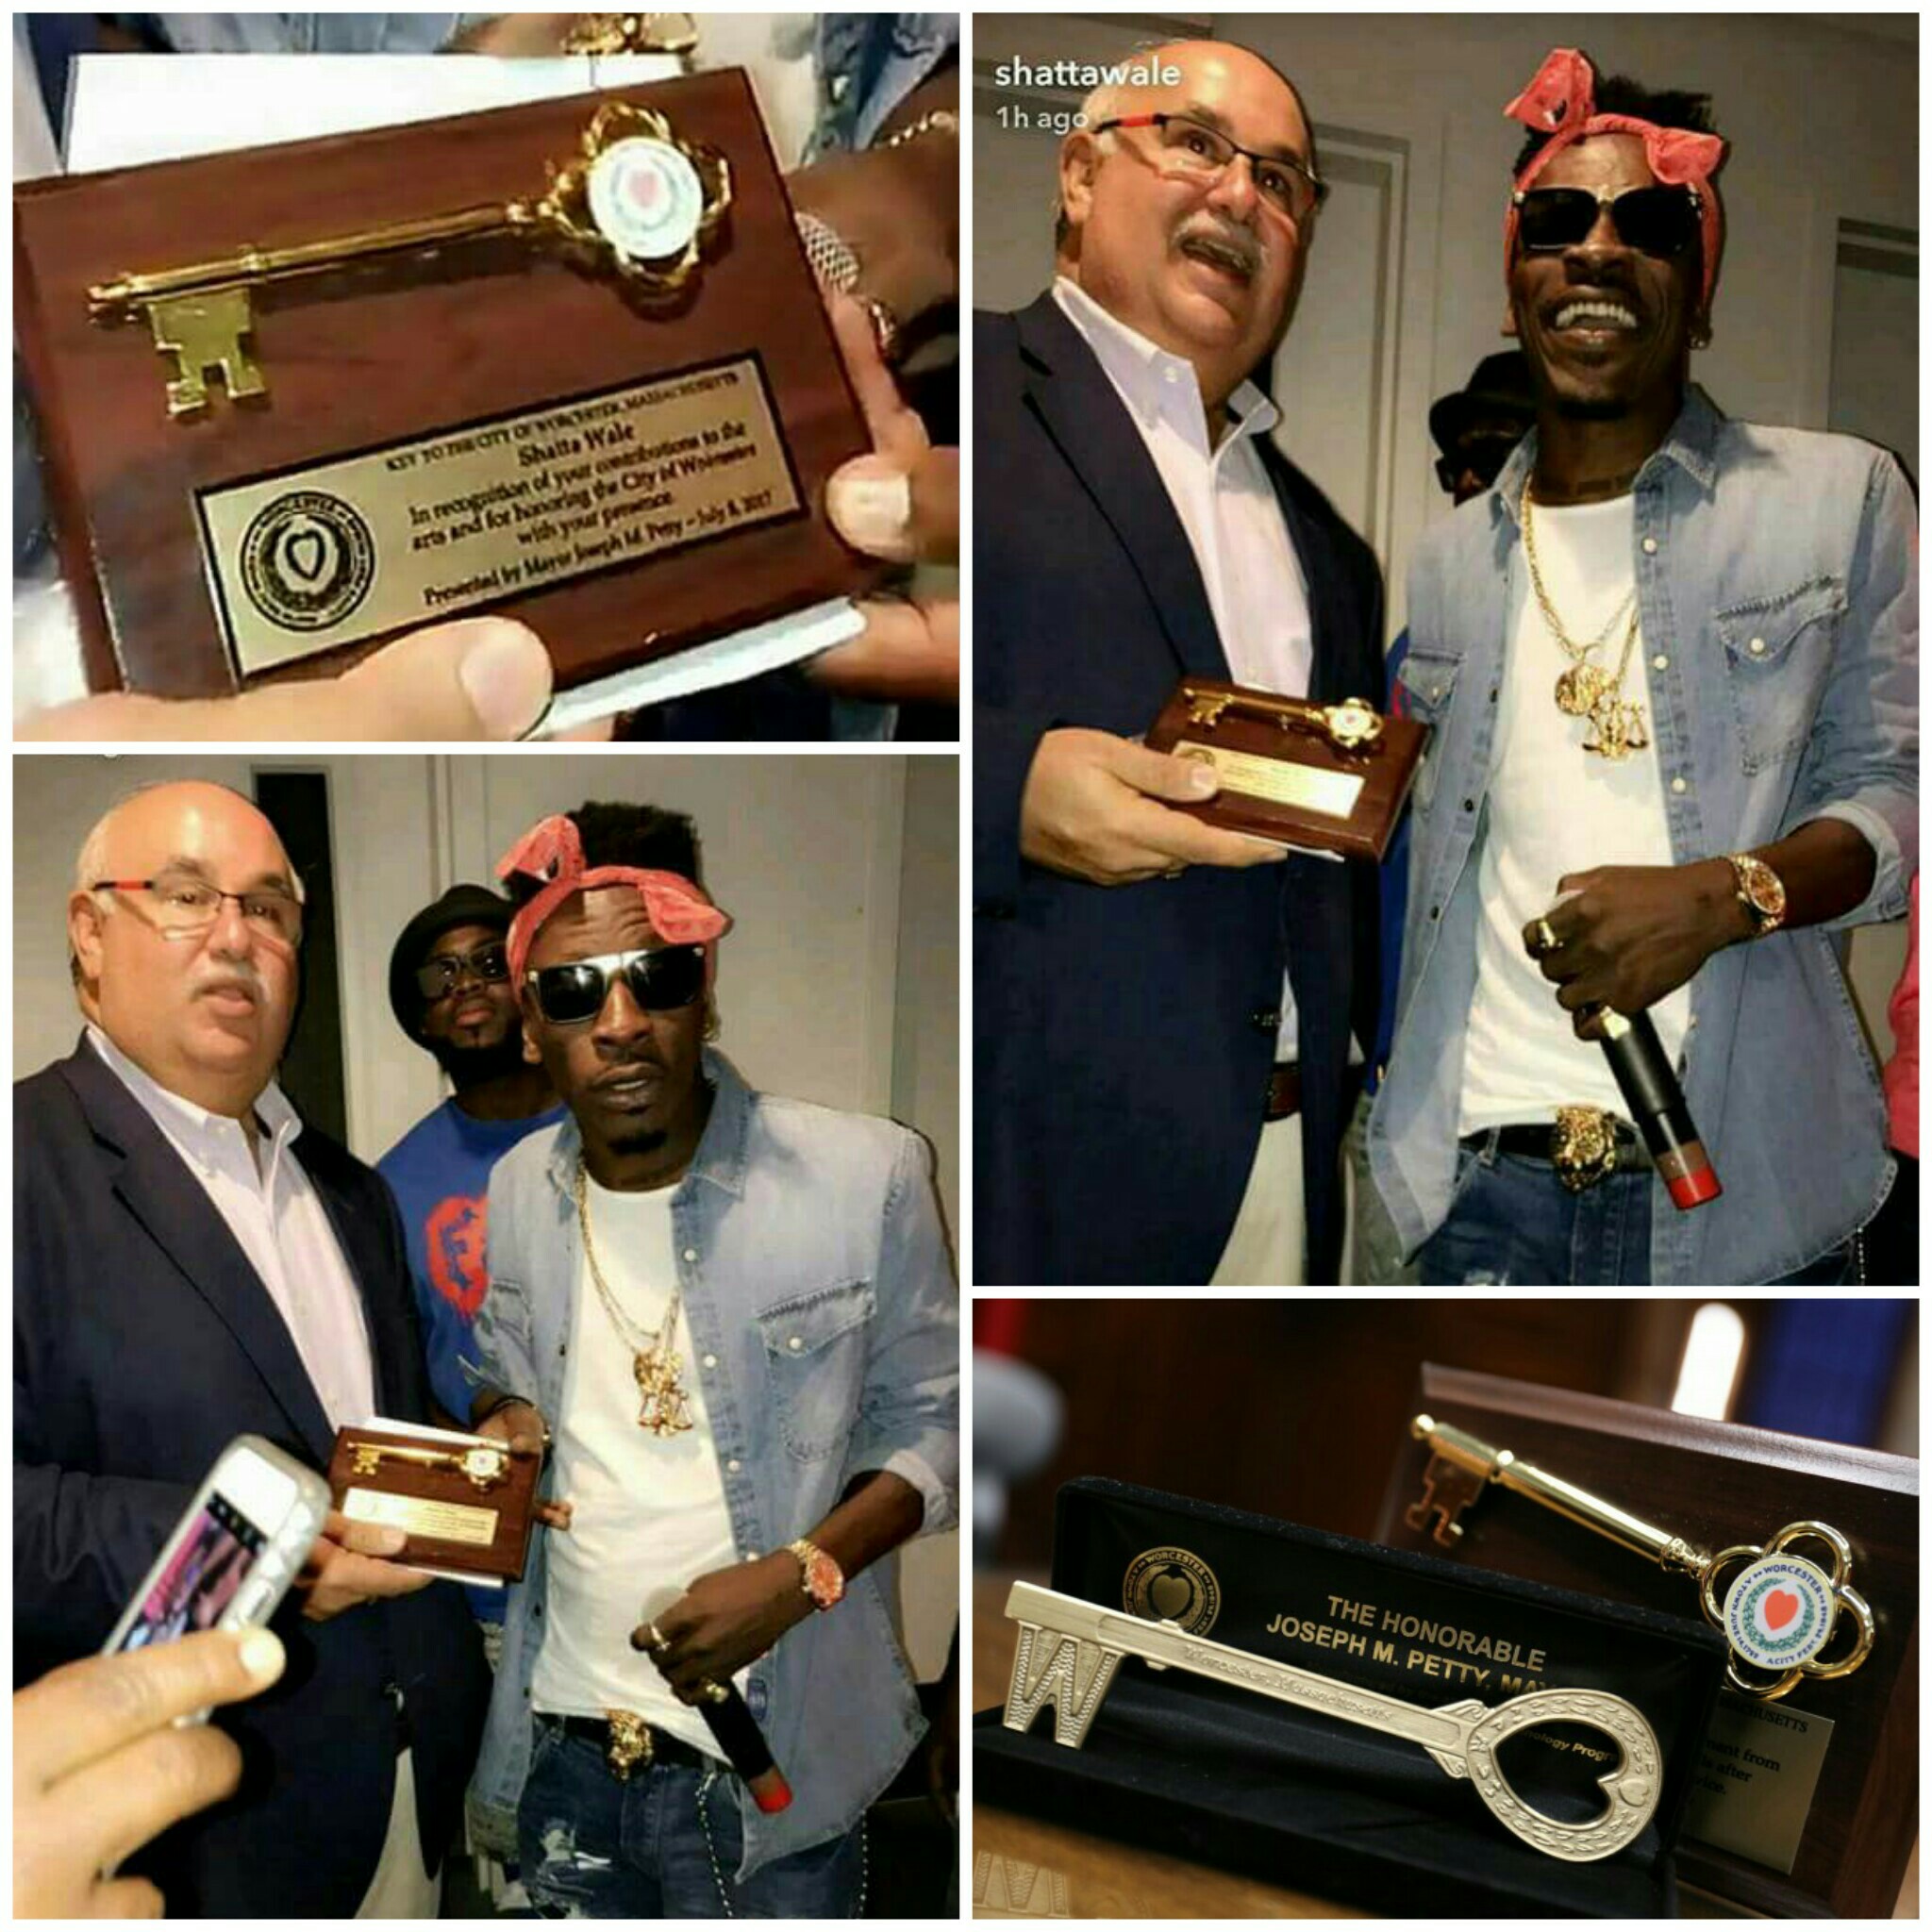 Mayor of Worcester, Joseph Petty Honours Shattawale With the "Key To The City" After Great Performance At Hanover Theater